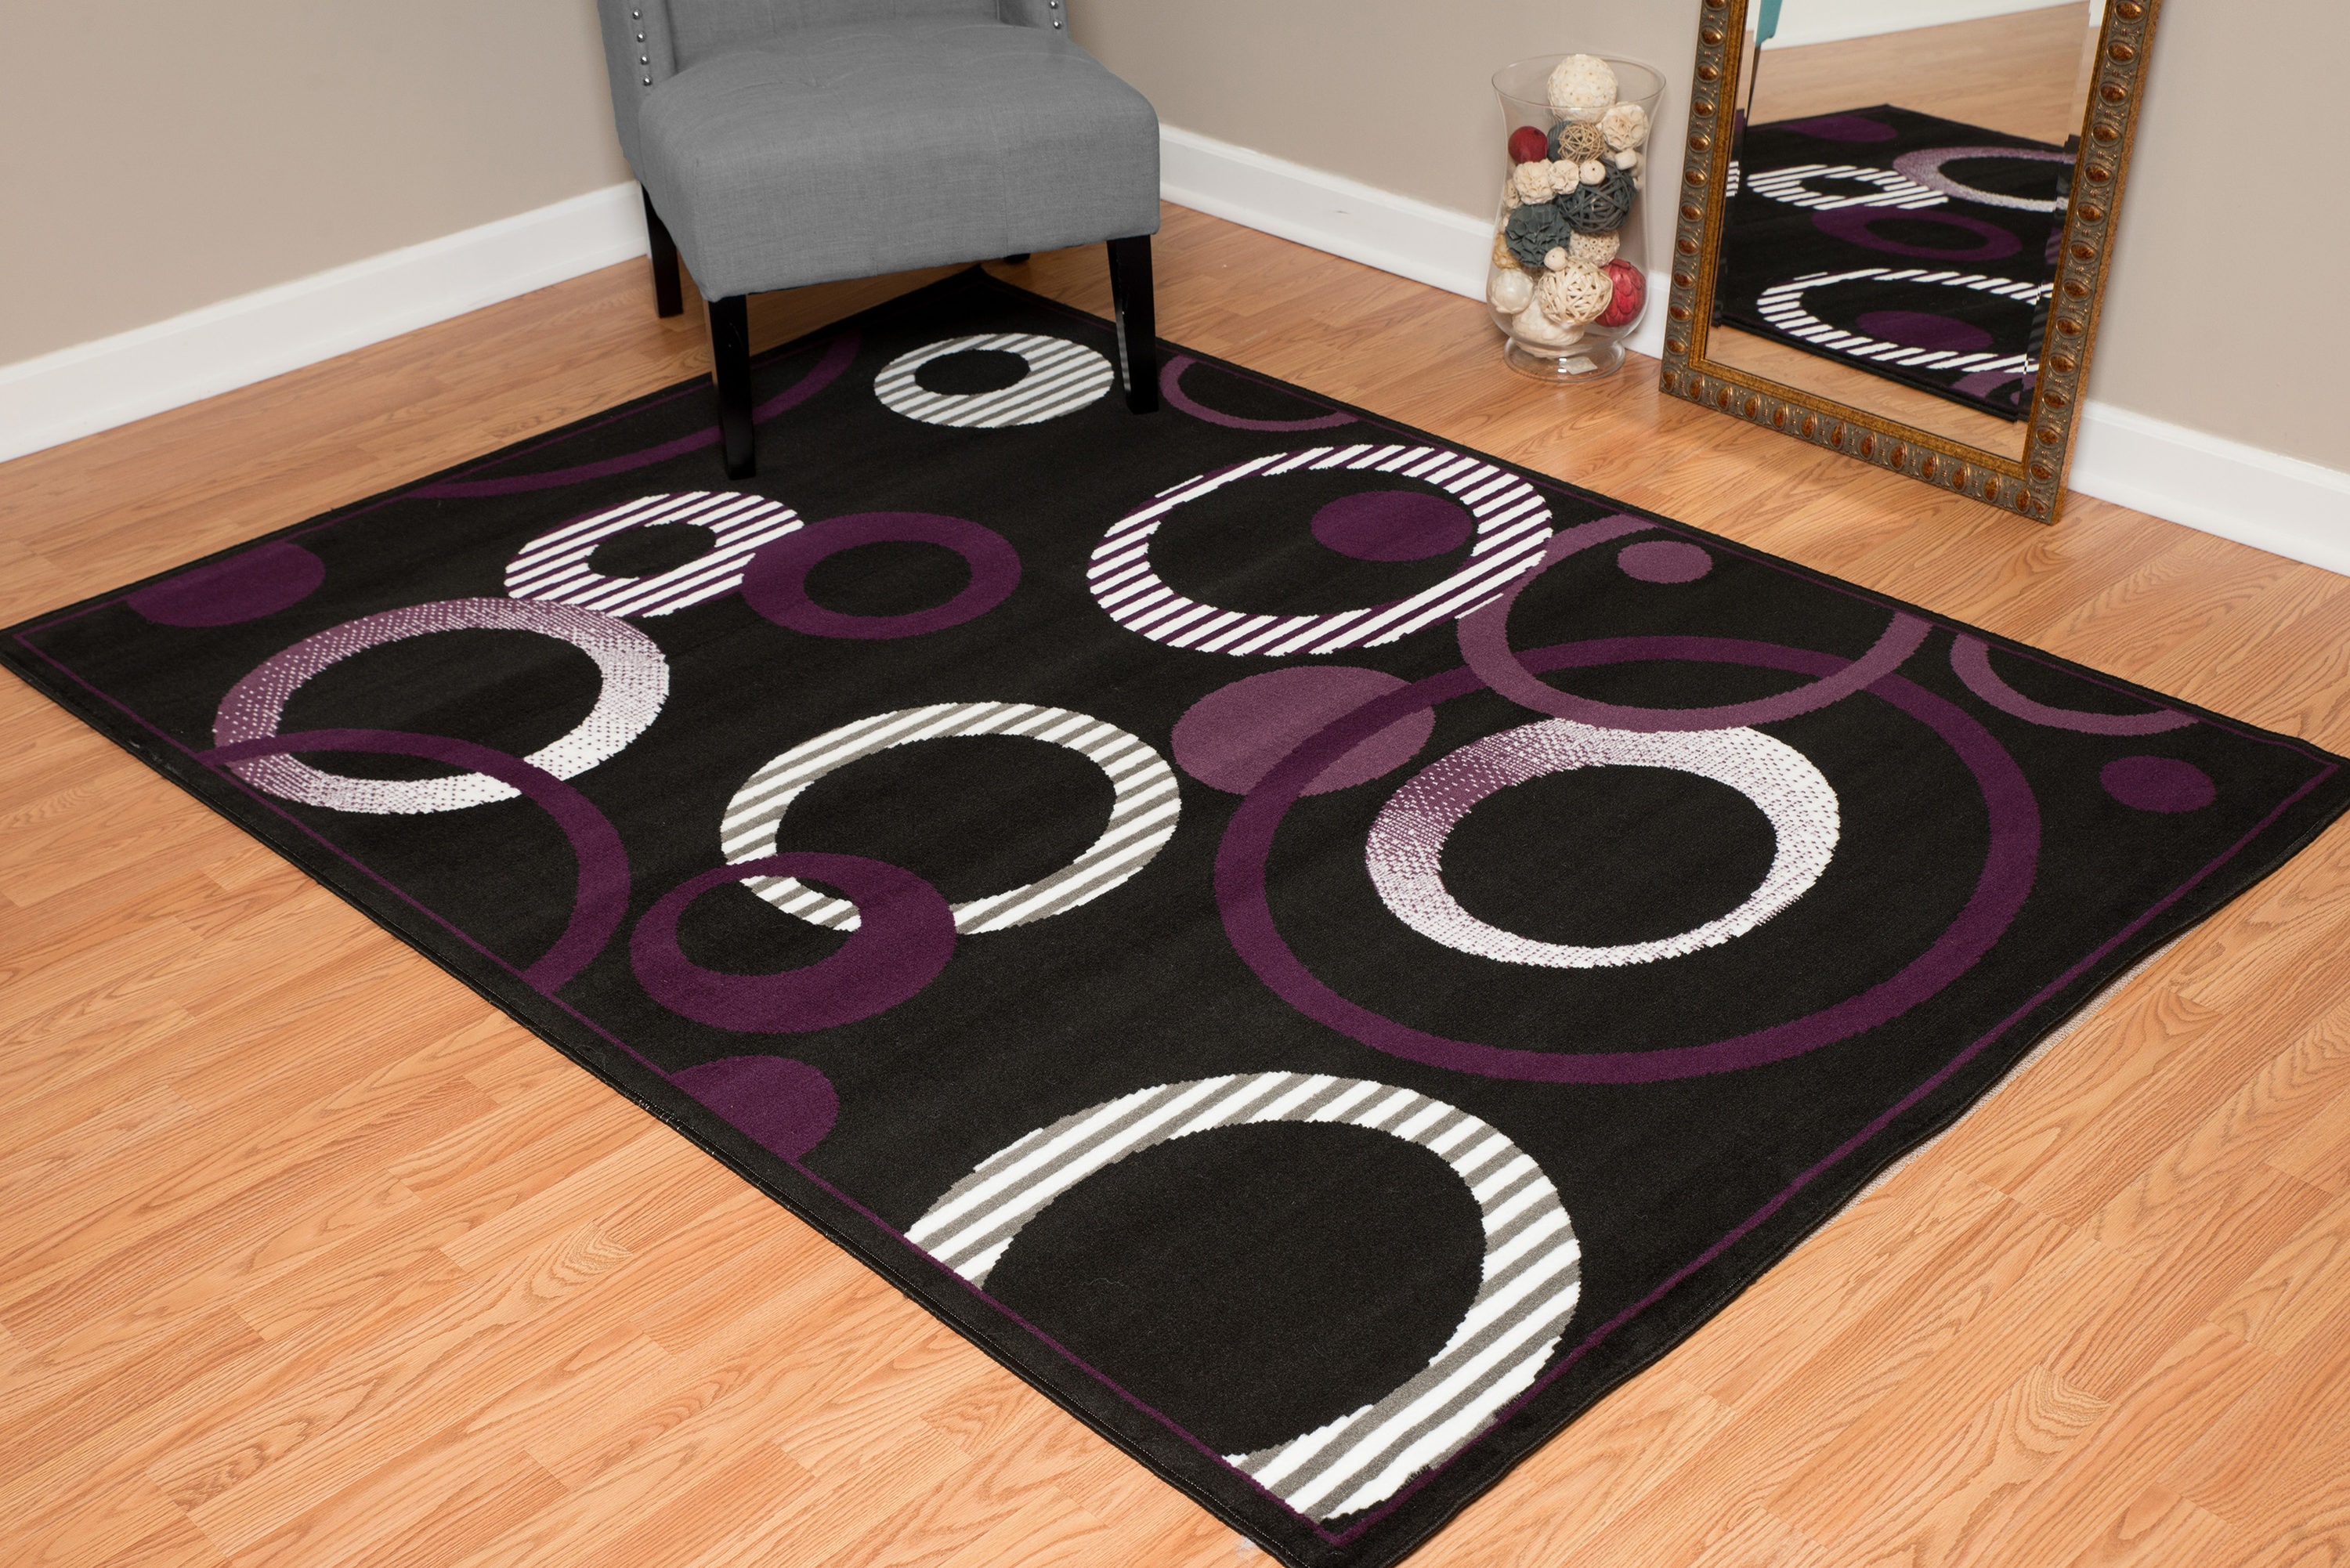 Rubber Backed Area Rug, 39 x 58 inch, Modern Circles, Non Slip